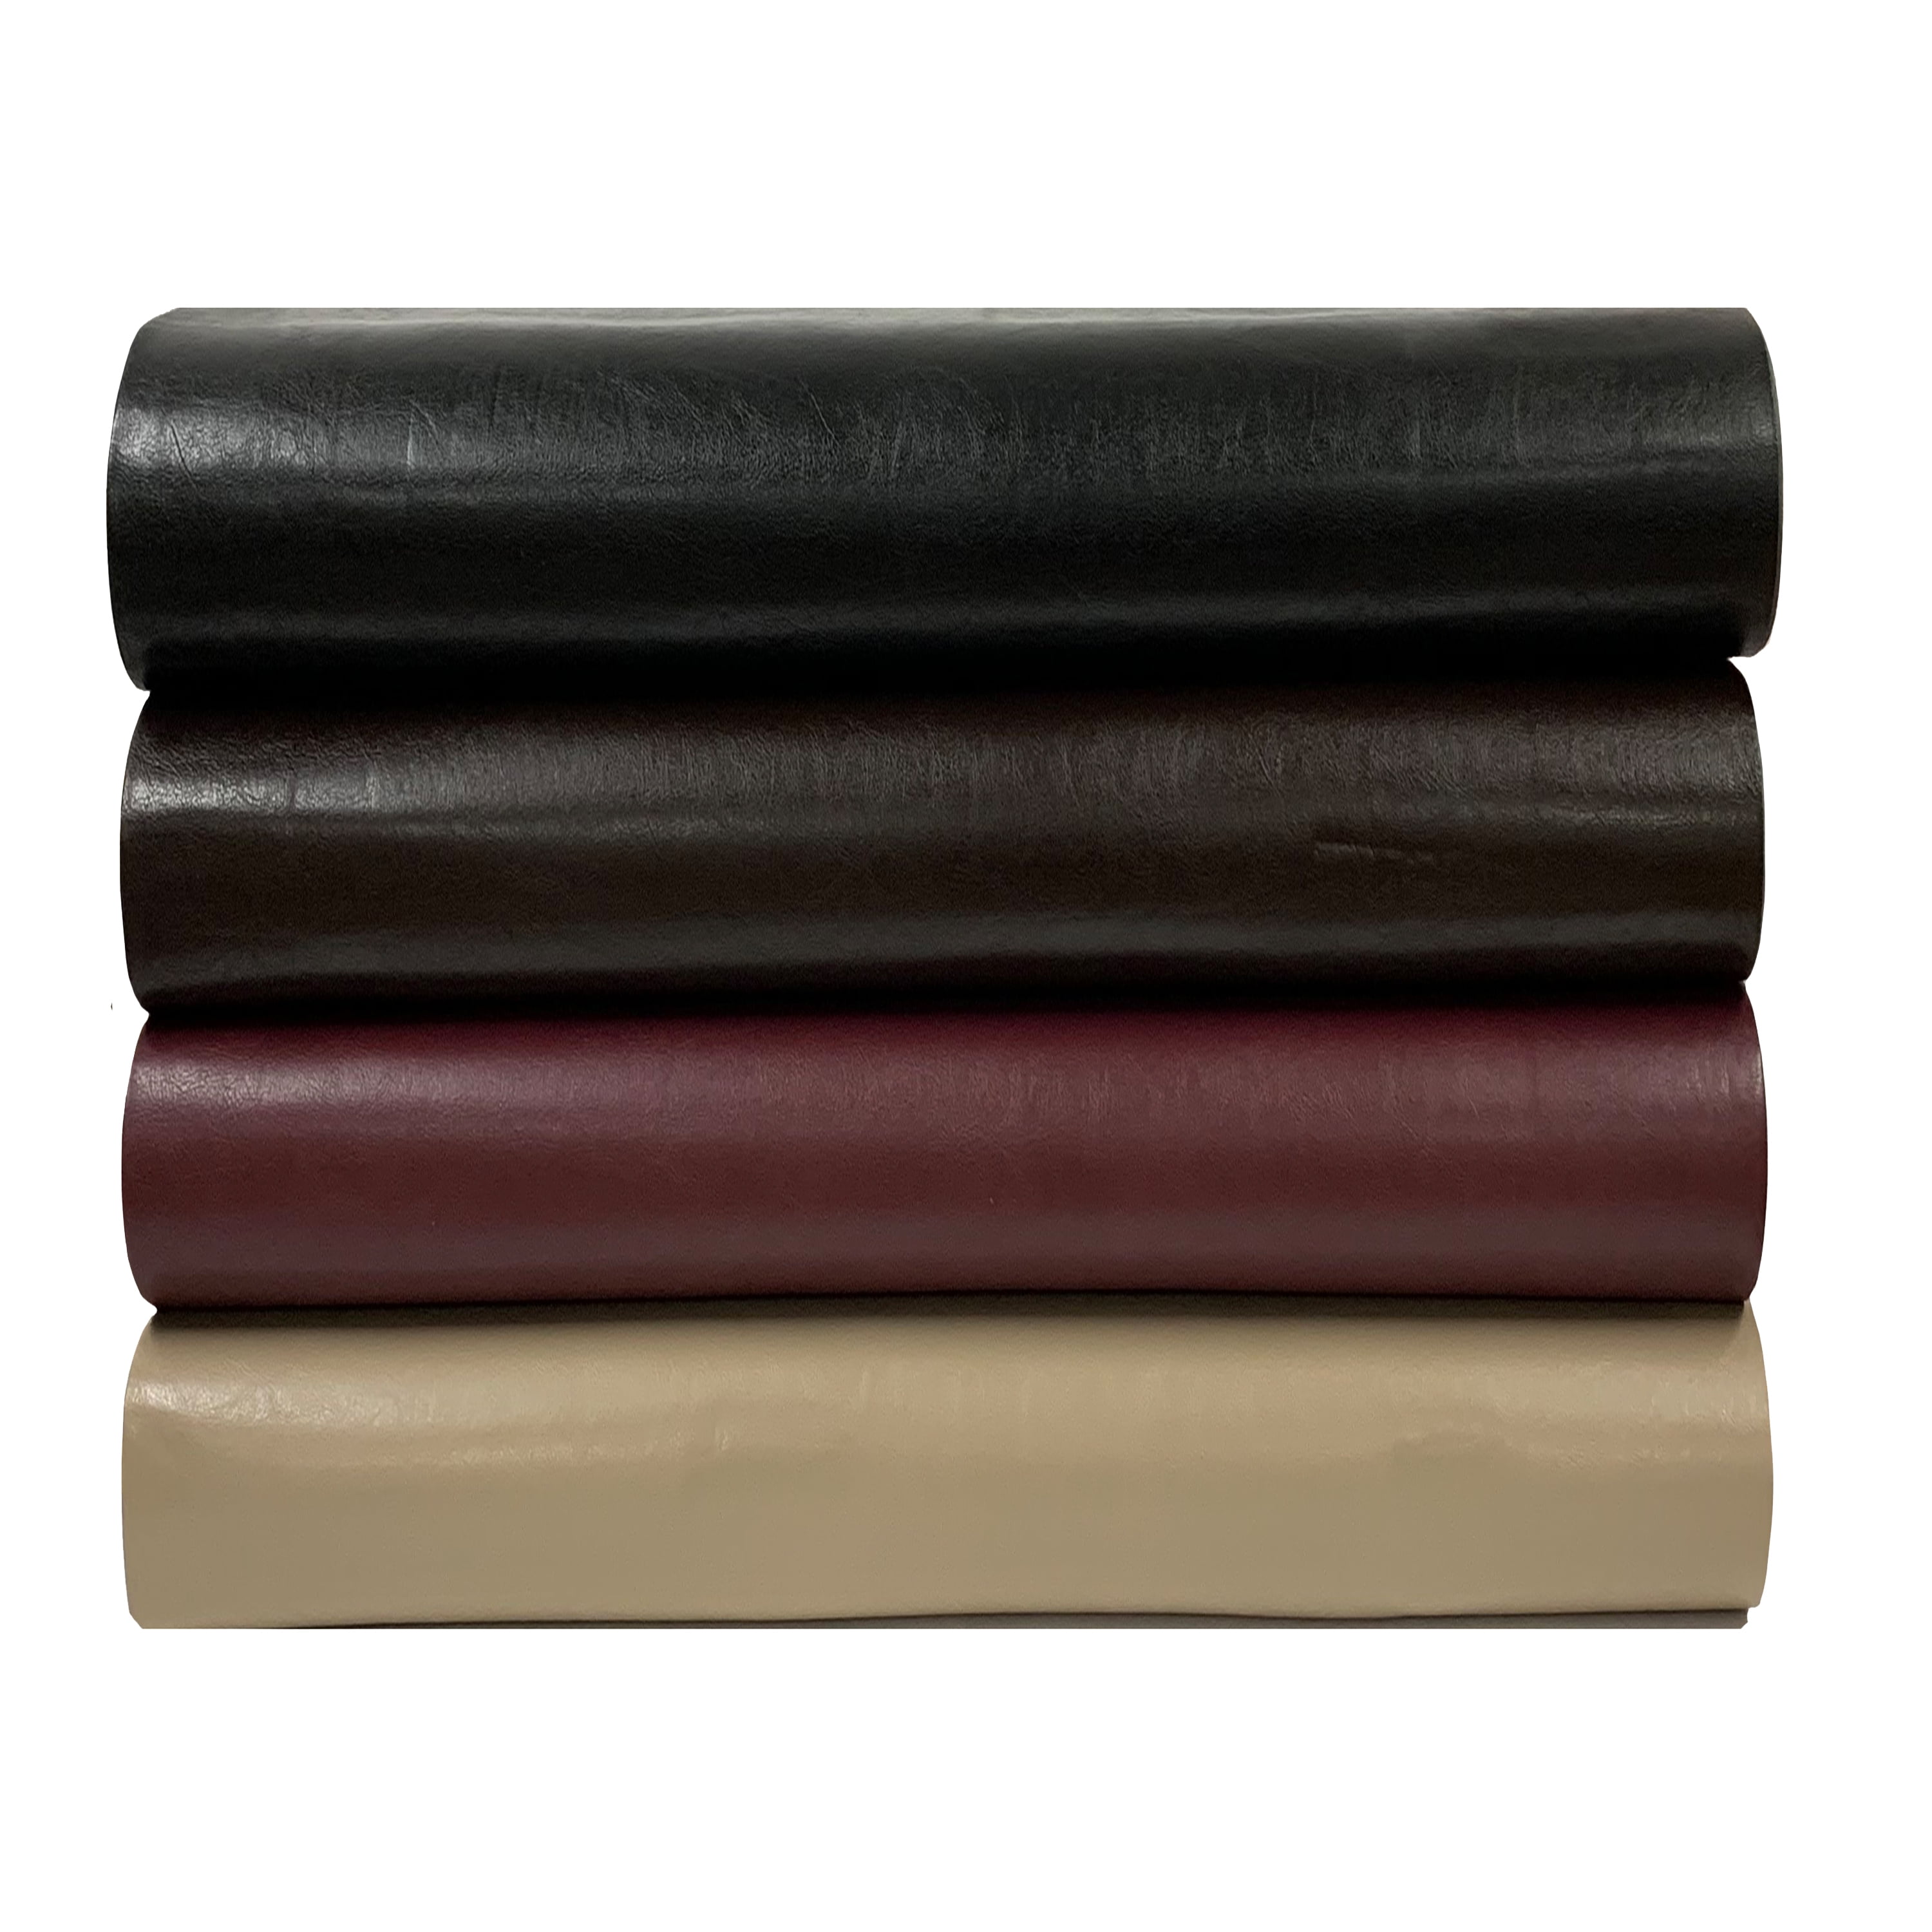 Shason Textile Faux Leather Upholstery, Colored Leather Fabric